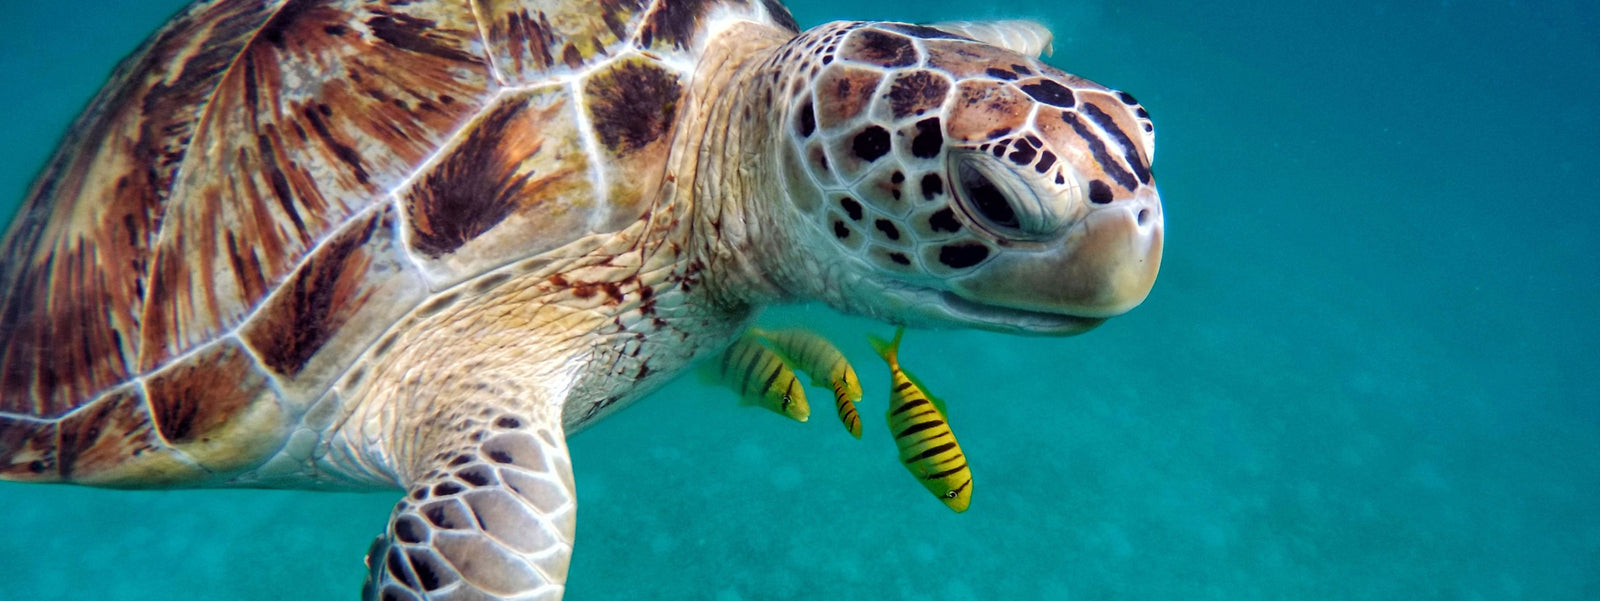 10 Ways to Celebrate World Oceans Month and Protect Our Seas